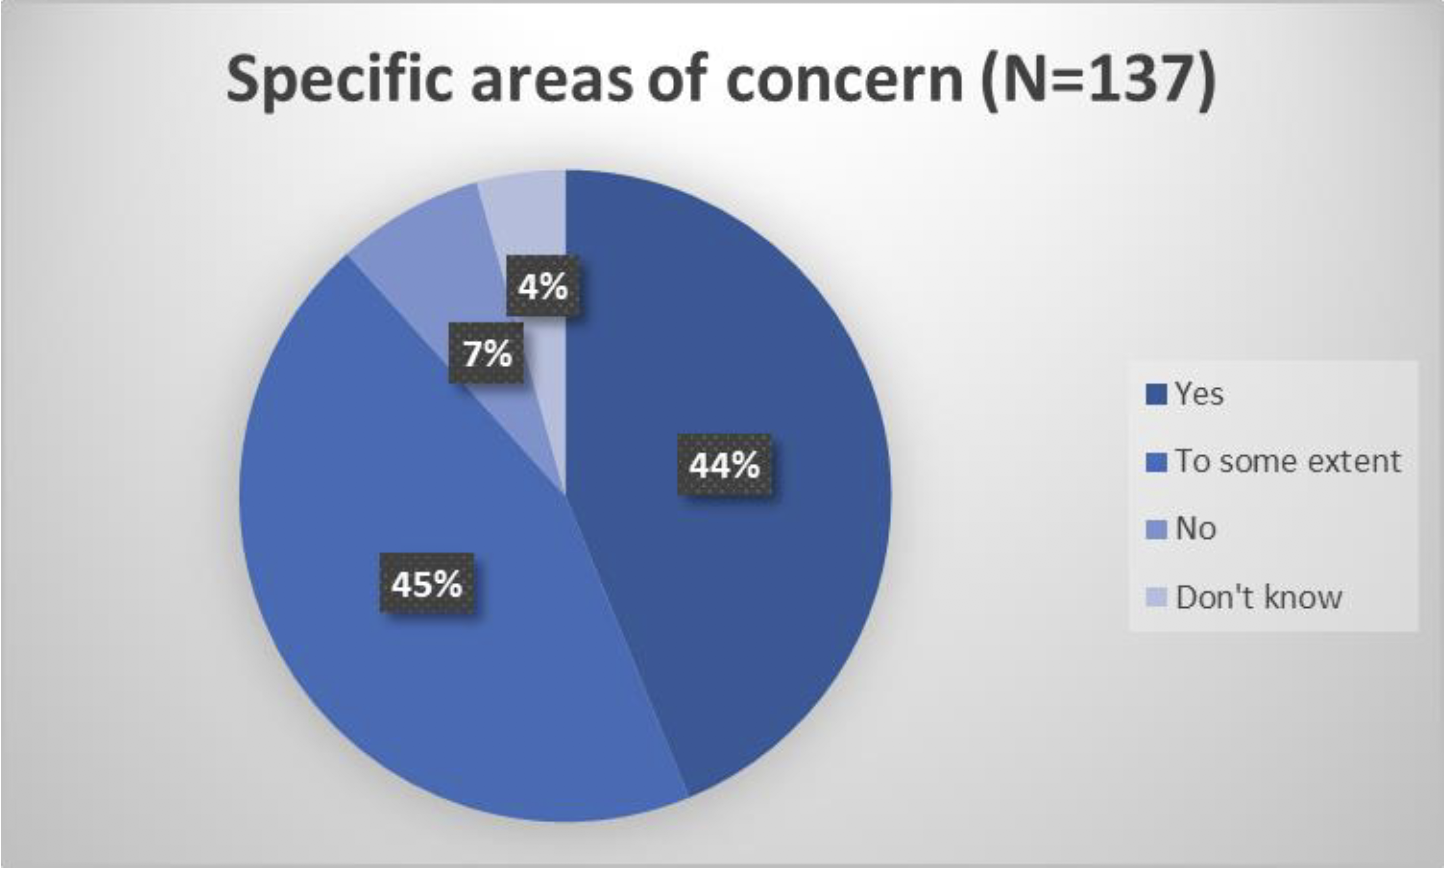 Pie chart showing whether respondents felt Part 4 addresses the specific areas of concern appropriately:
Yes 4%
To some extent 45%
No 7%
Don't know 4%